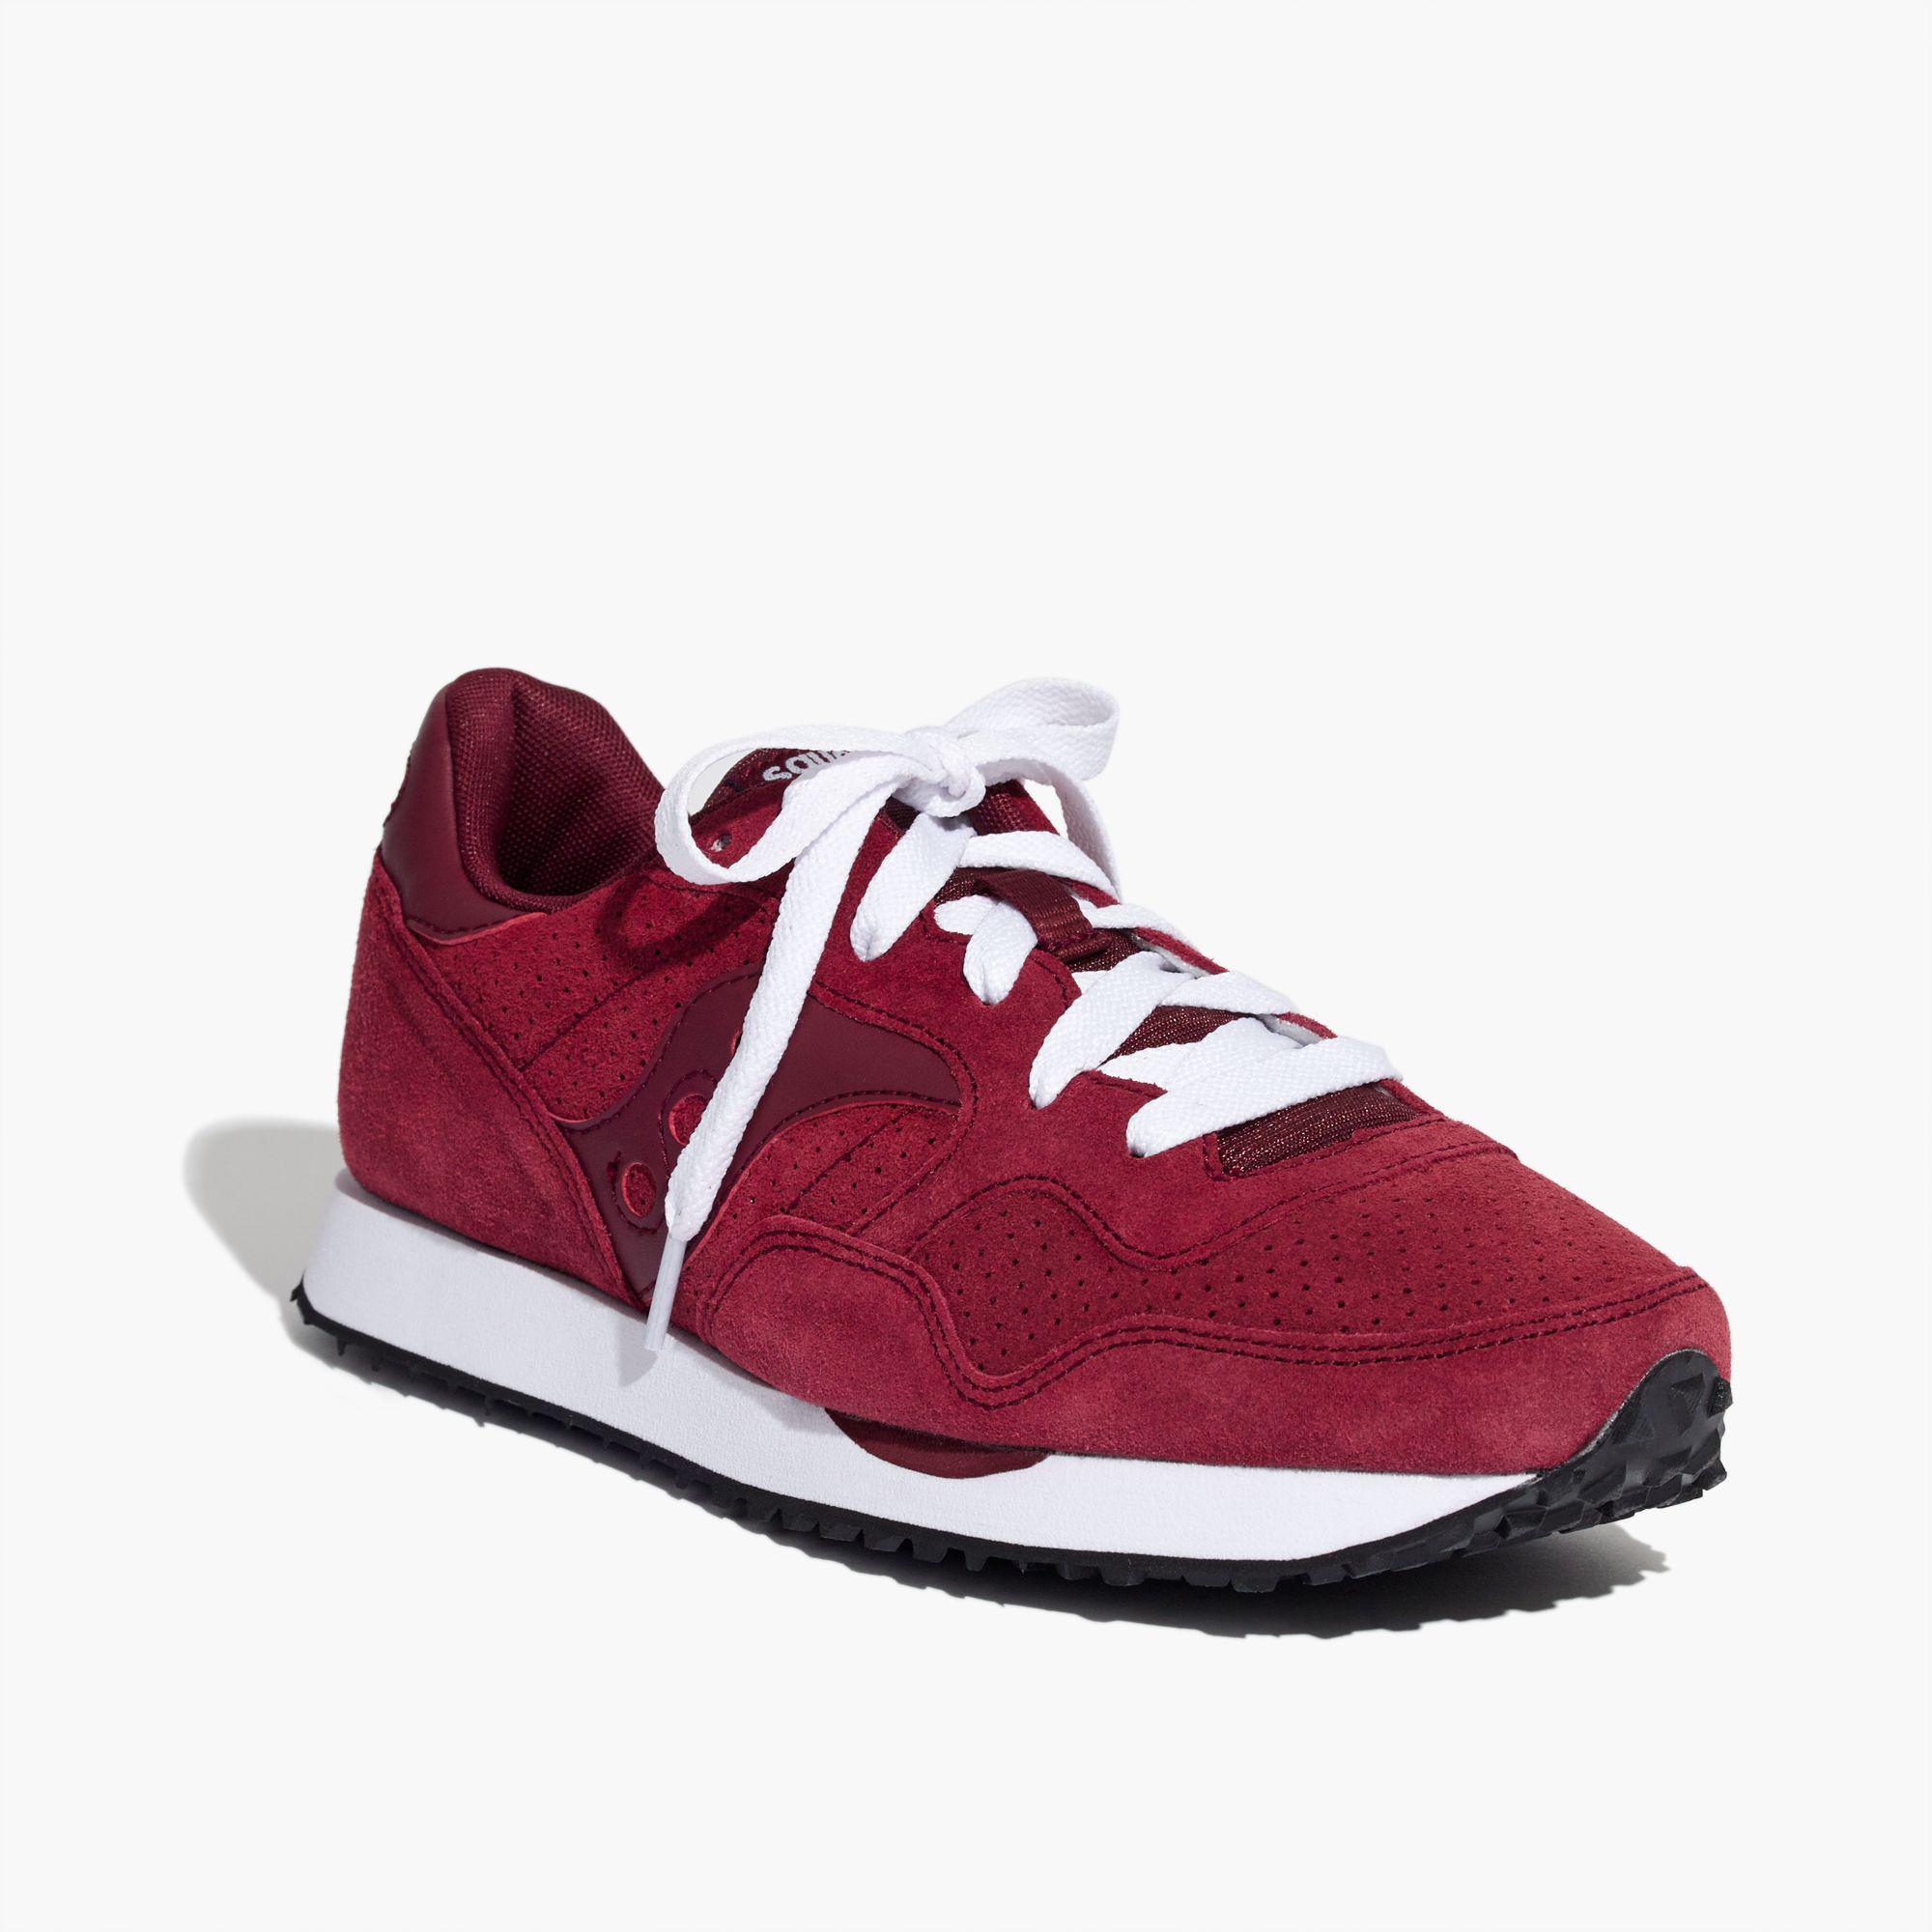 madewell and saucony dxn trainers